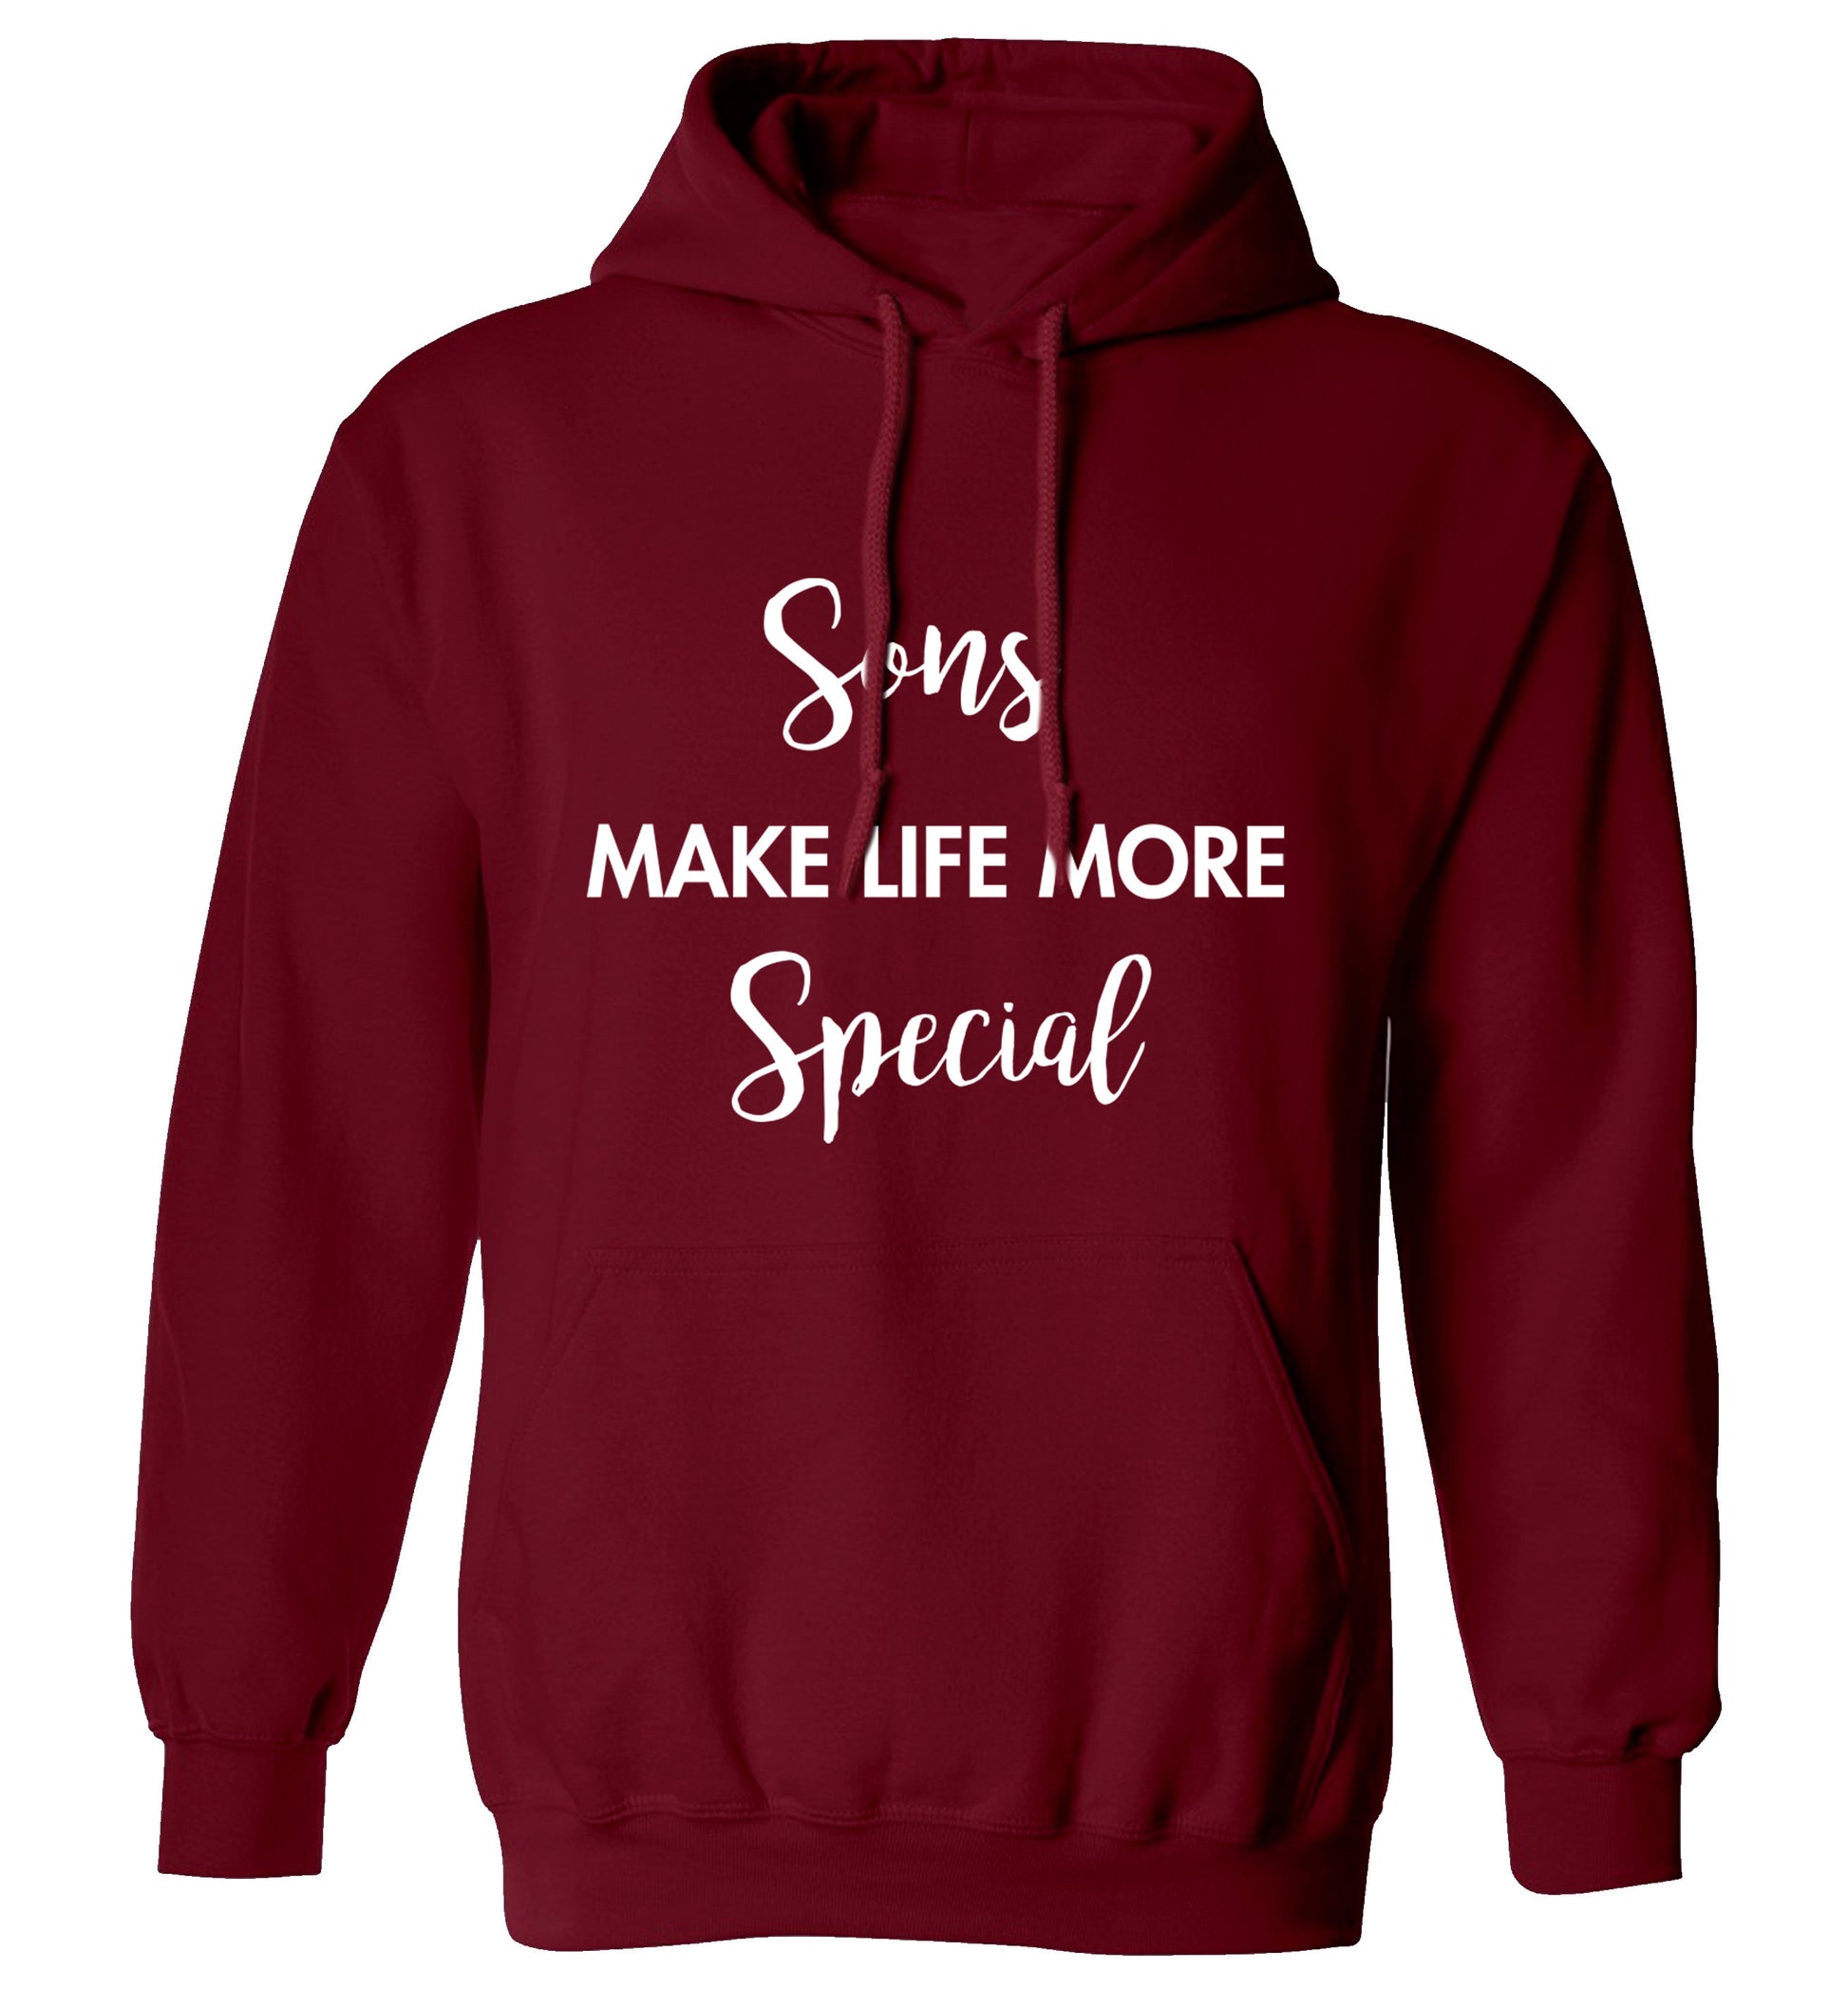 Sons make life more special adults unisex maroon hoodie 2XL